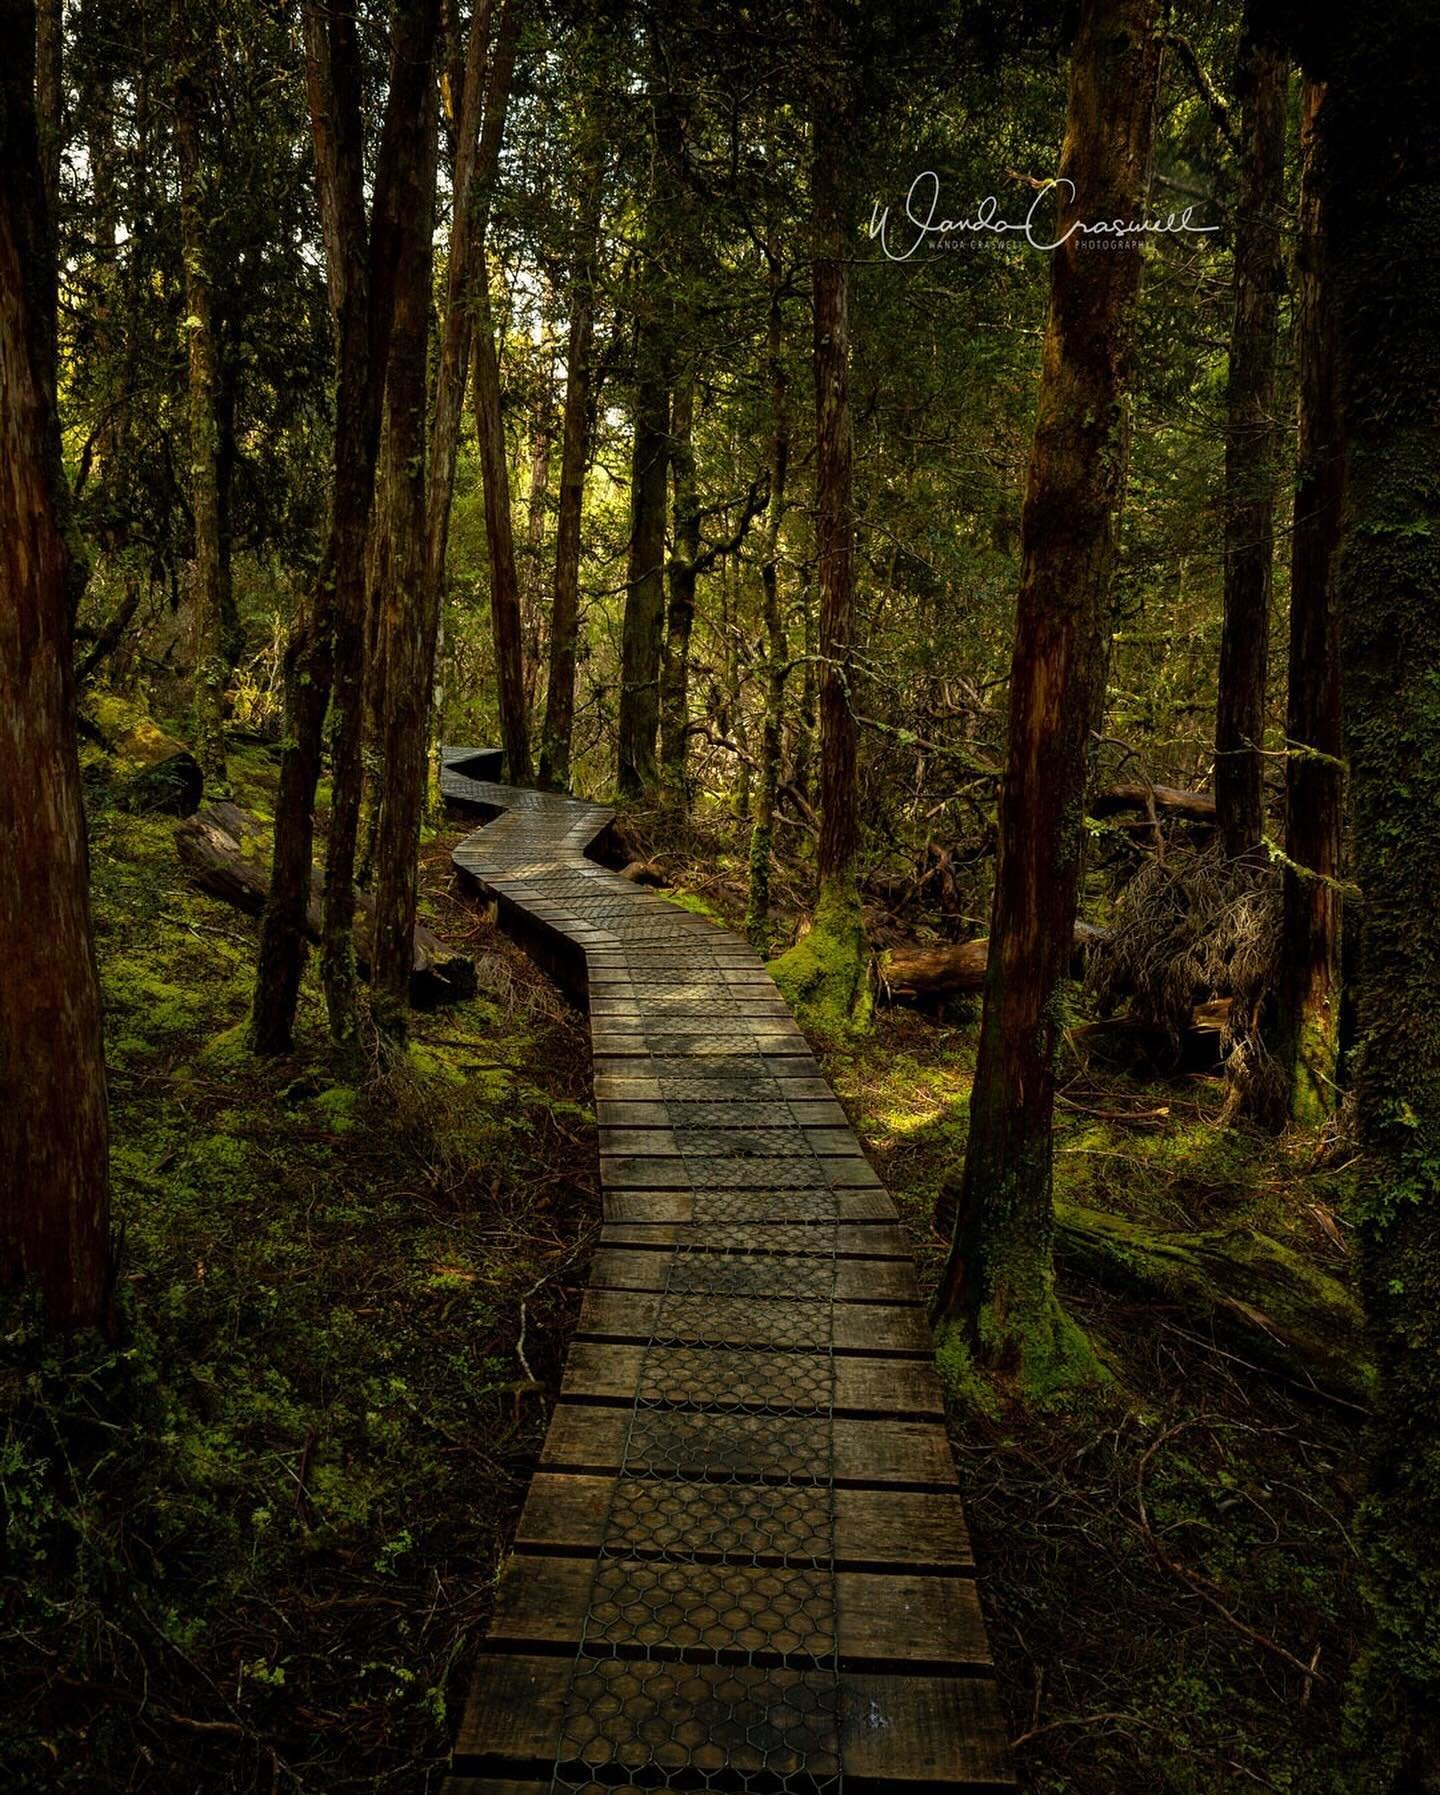 On my West Coast + Cradle Mountain tour in Tasmania&hellip;.we spend a couple of days at Cradle Mountain&hellip;endless walking trails, lush green forest, boardwalks, waterfalls, wombats!!!! and so much more. It&rsquo;s a great place to spend some ti